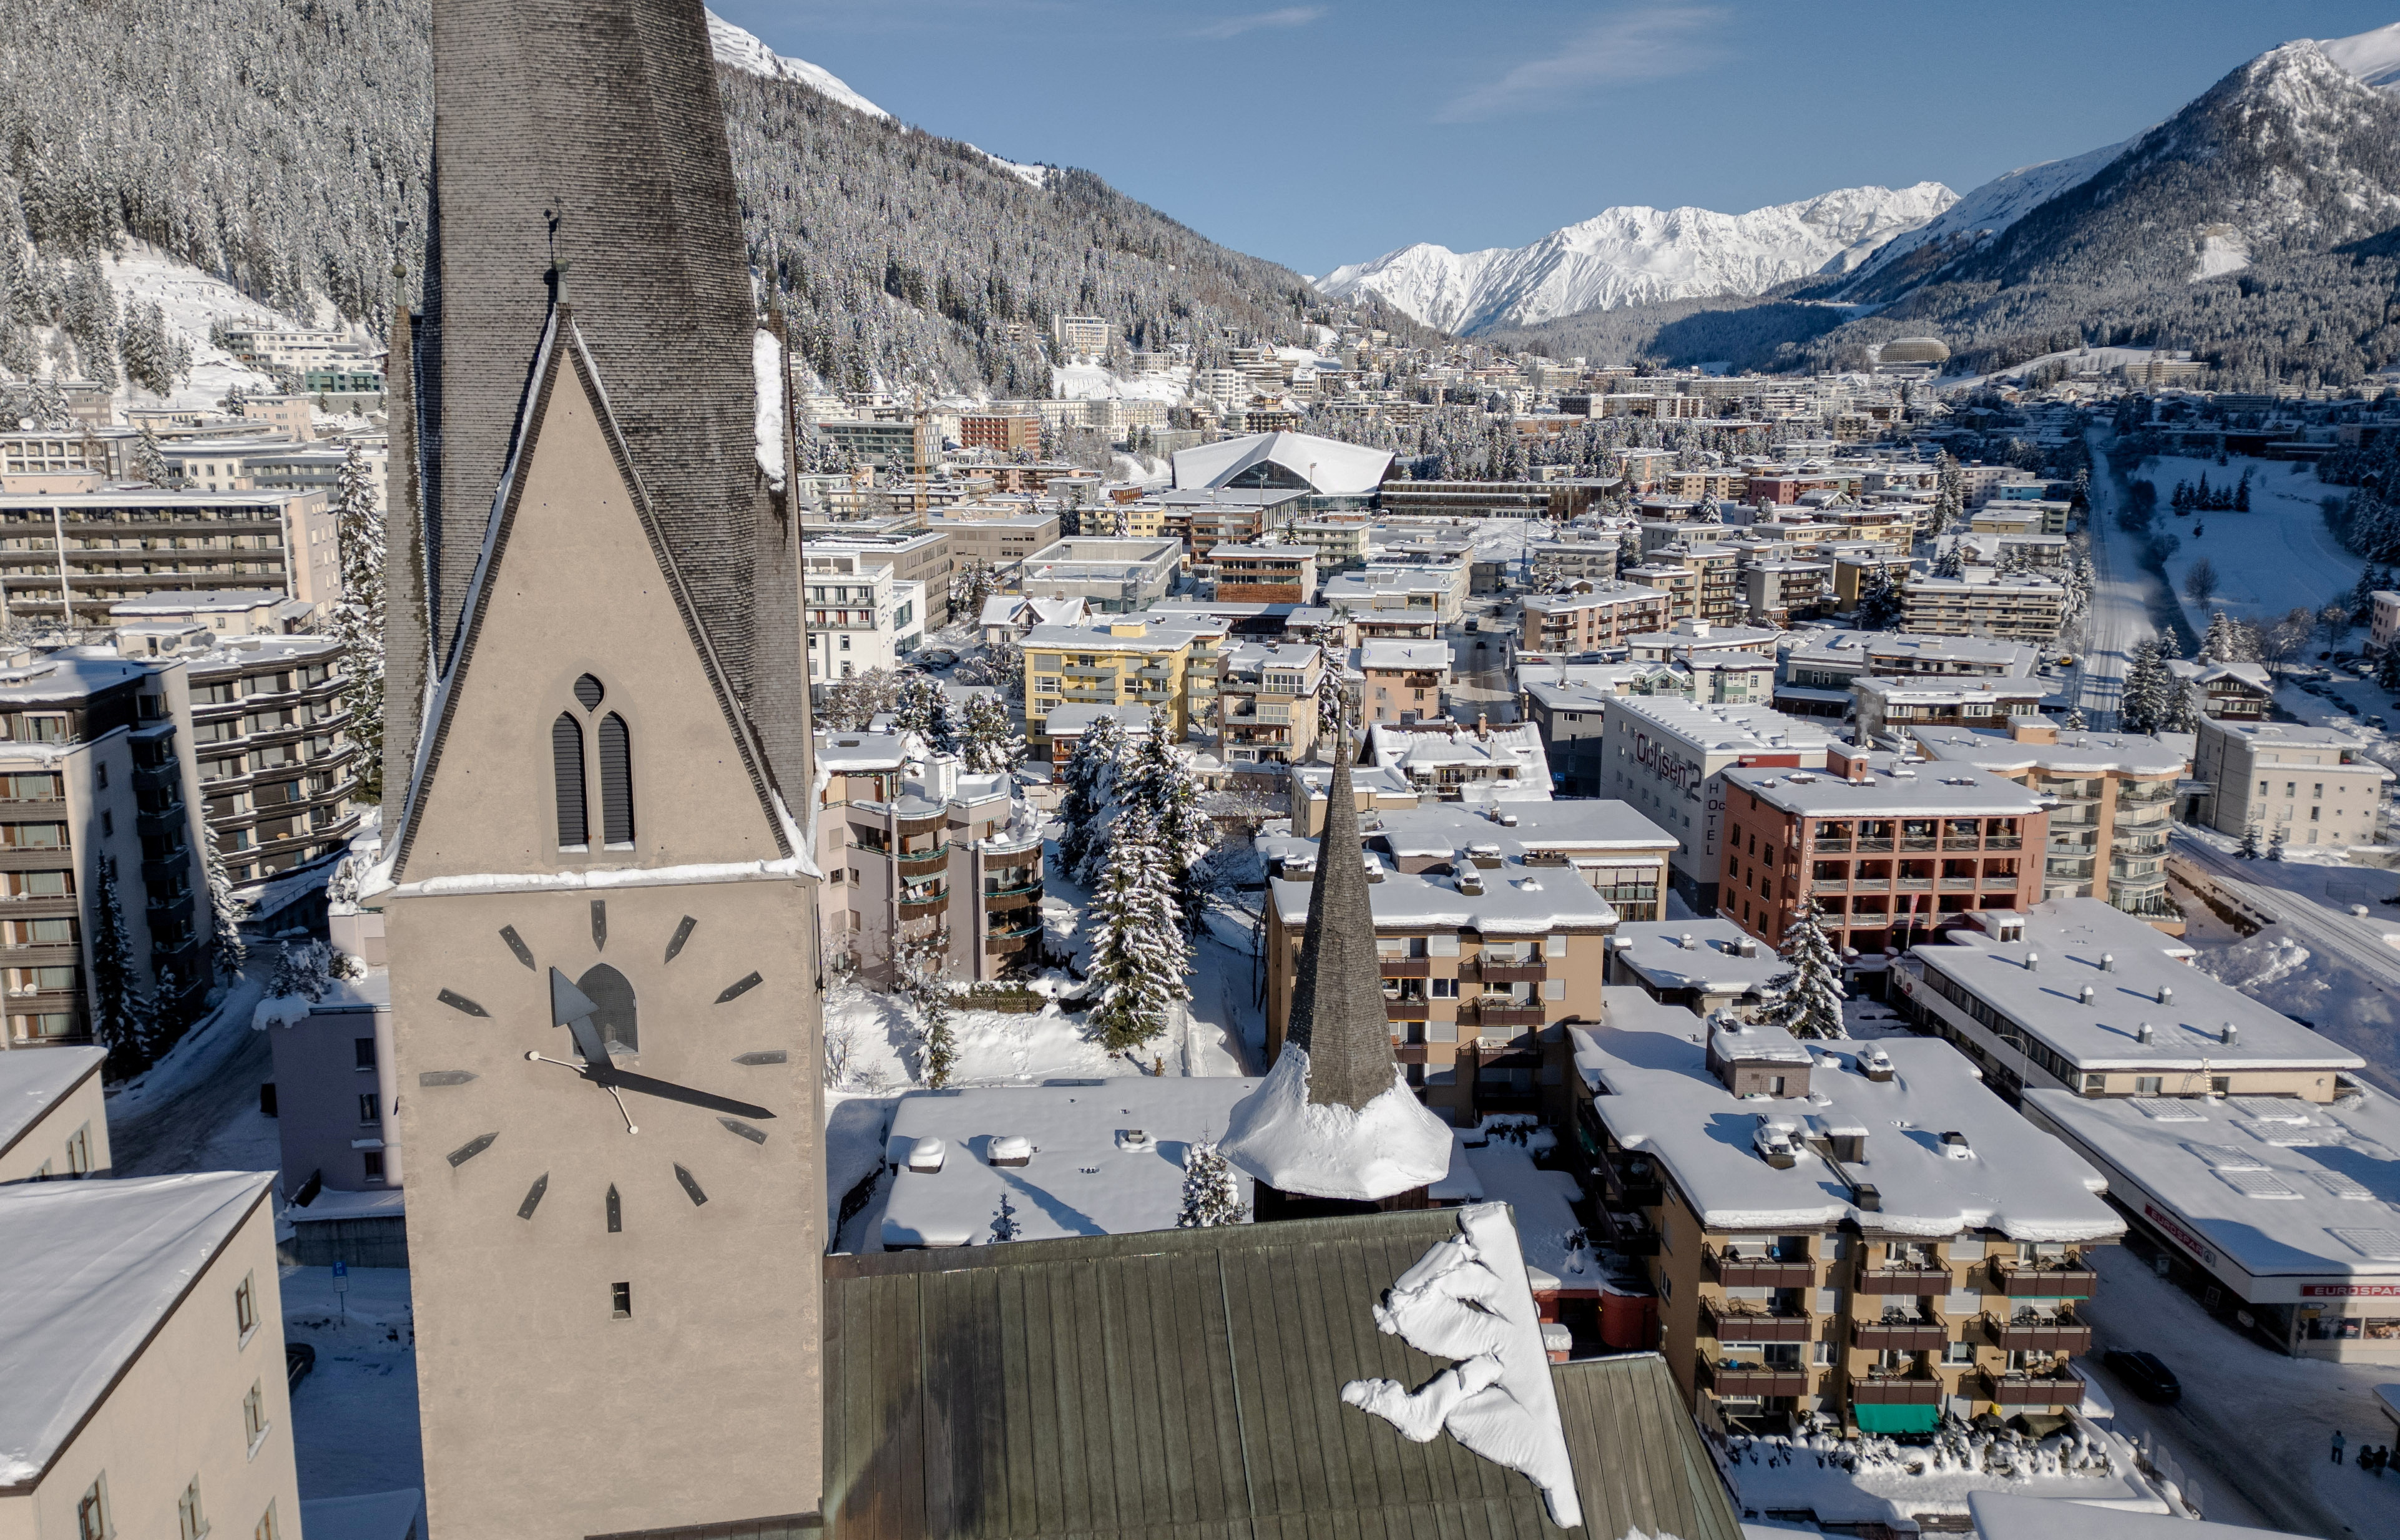 Overview of the town of Davos ahead of the annual meeting of the WEF